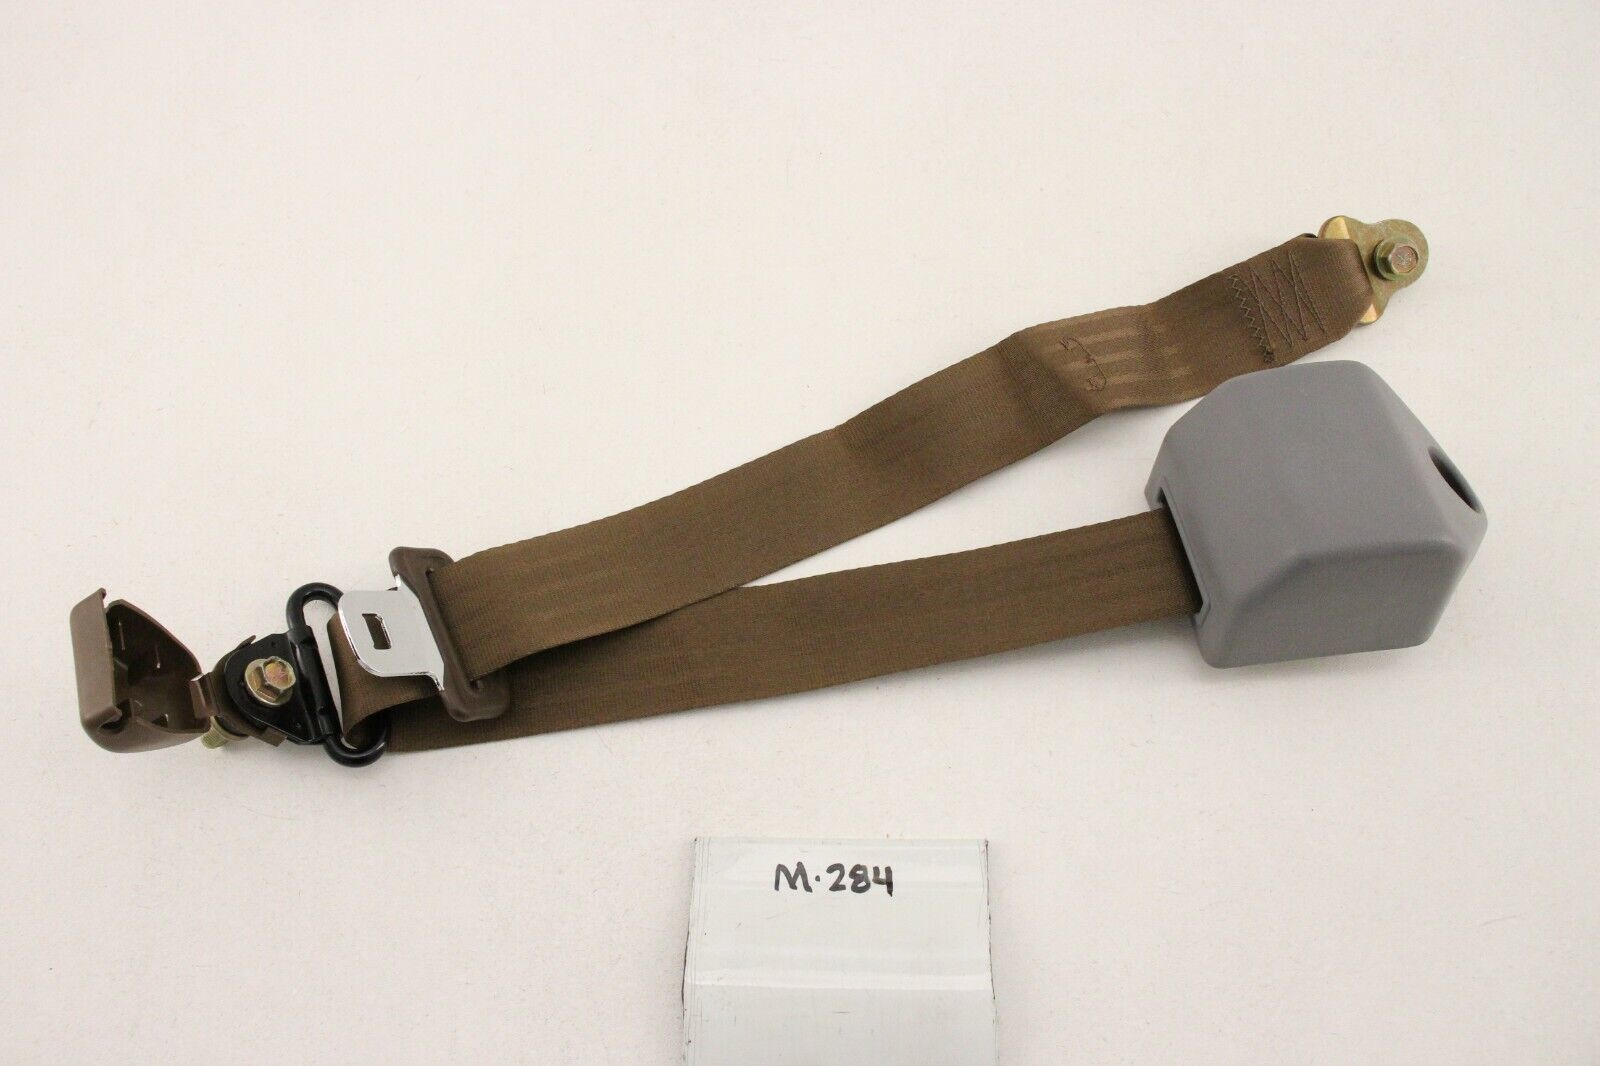 New OEM GM Rear Seat Belt Buckle 1991 1992 Toyota Corolla Geo Prizm LH Outer - $24.75